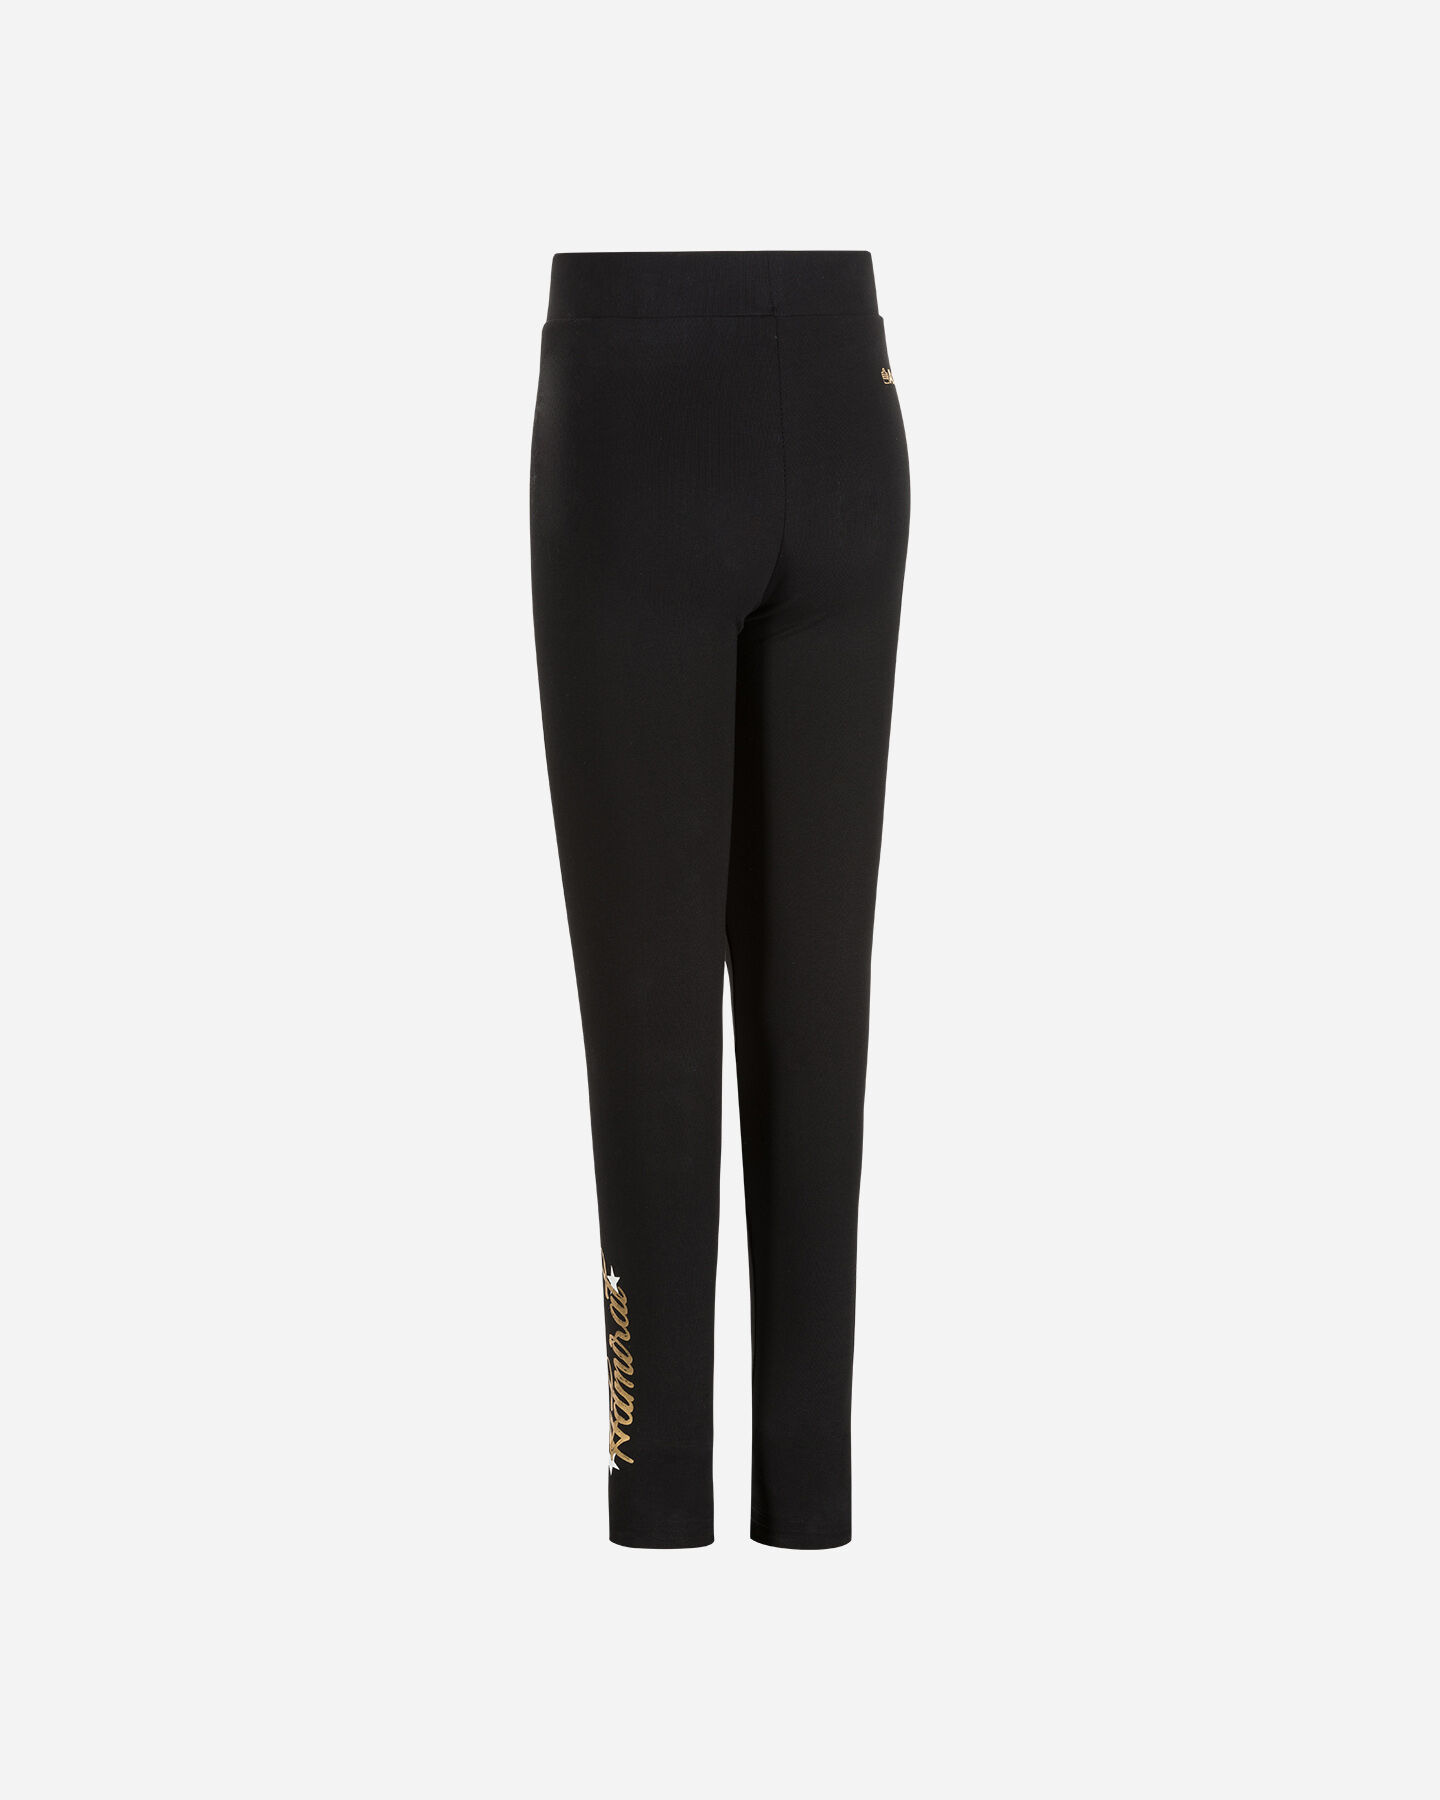  Leggings ADMIRAL JSTRETCH JR S4082031|050|4A scatto 1